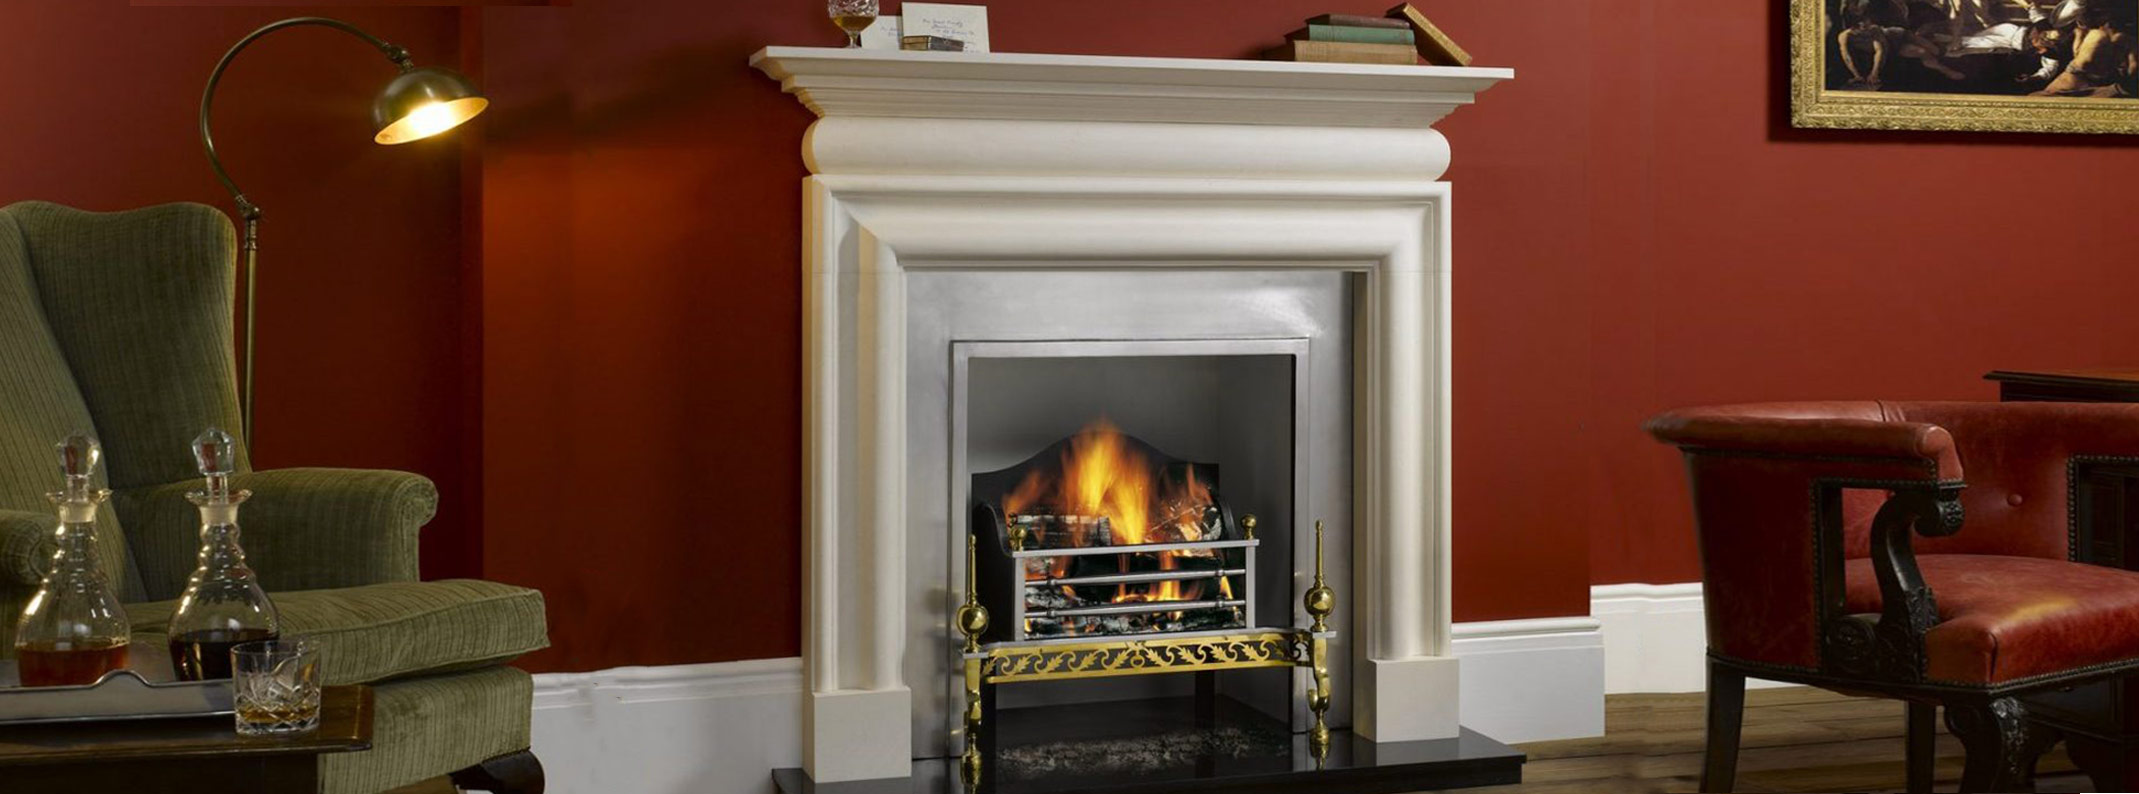 Bolection Marble Fireplace Mantels